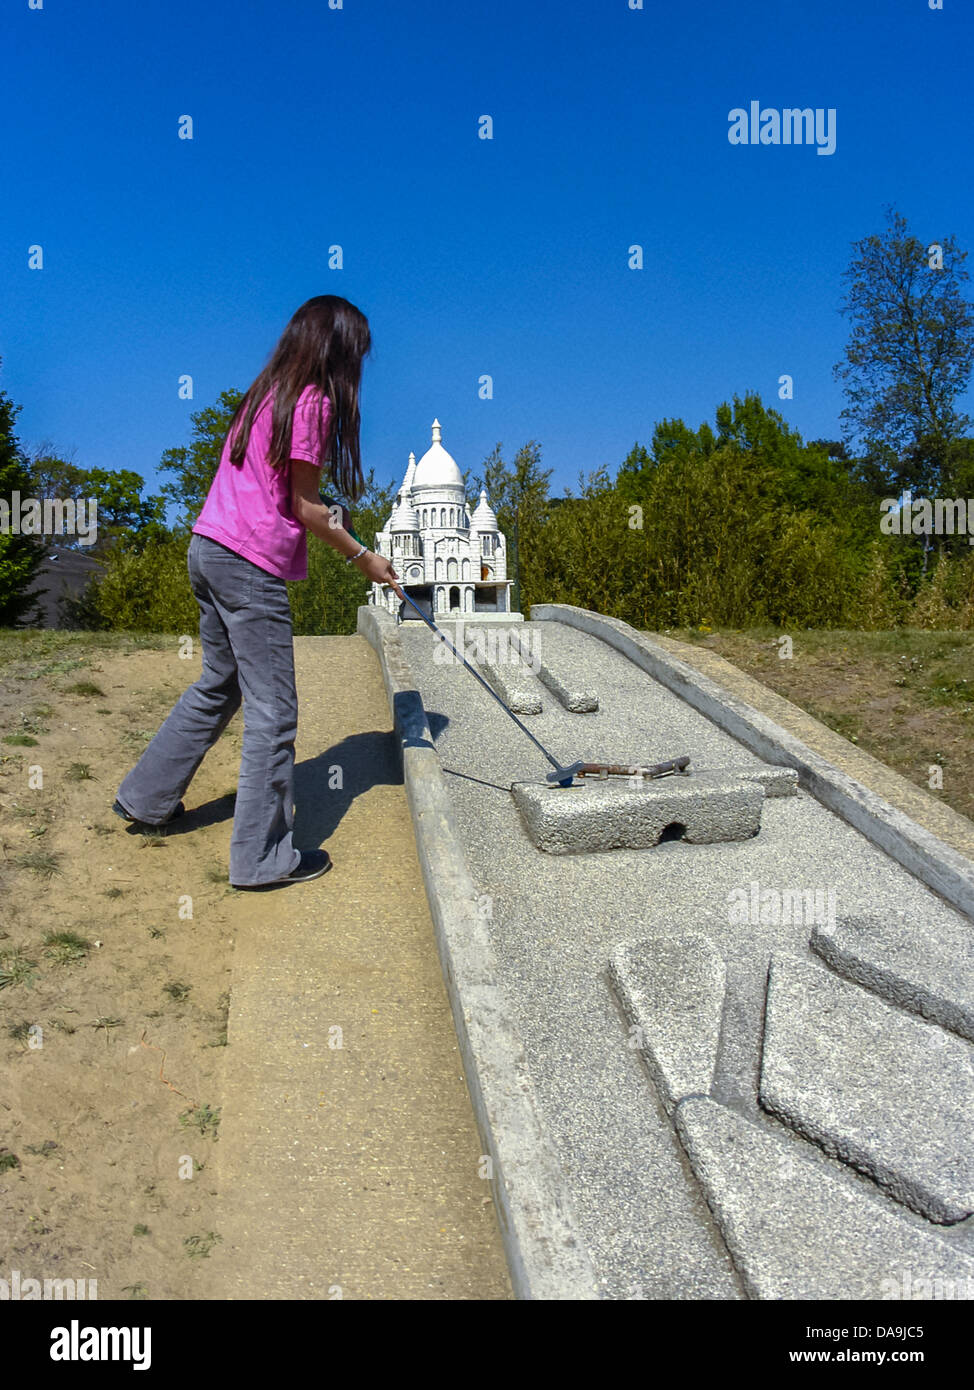 PARIS, France - Children Playing Miniature Golf Course in, Bois de Vincennes, (Model of Sacre Coeur Church). young teenage French girl, holidays fun Stock Photo